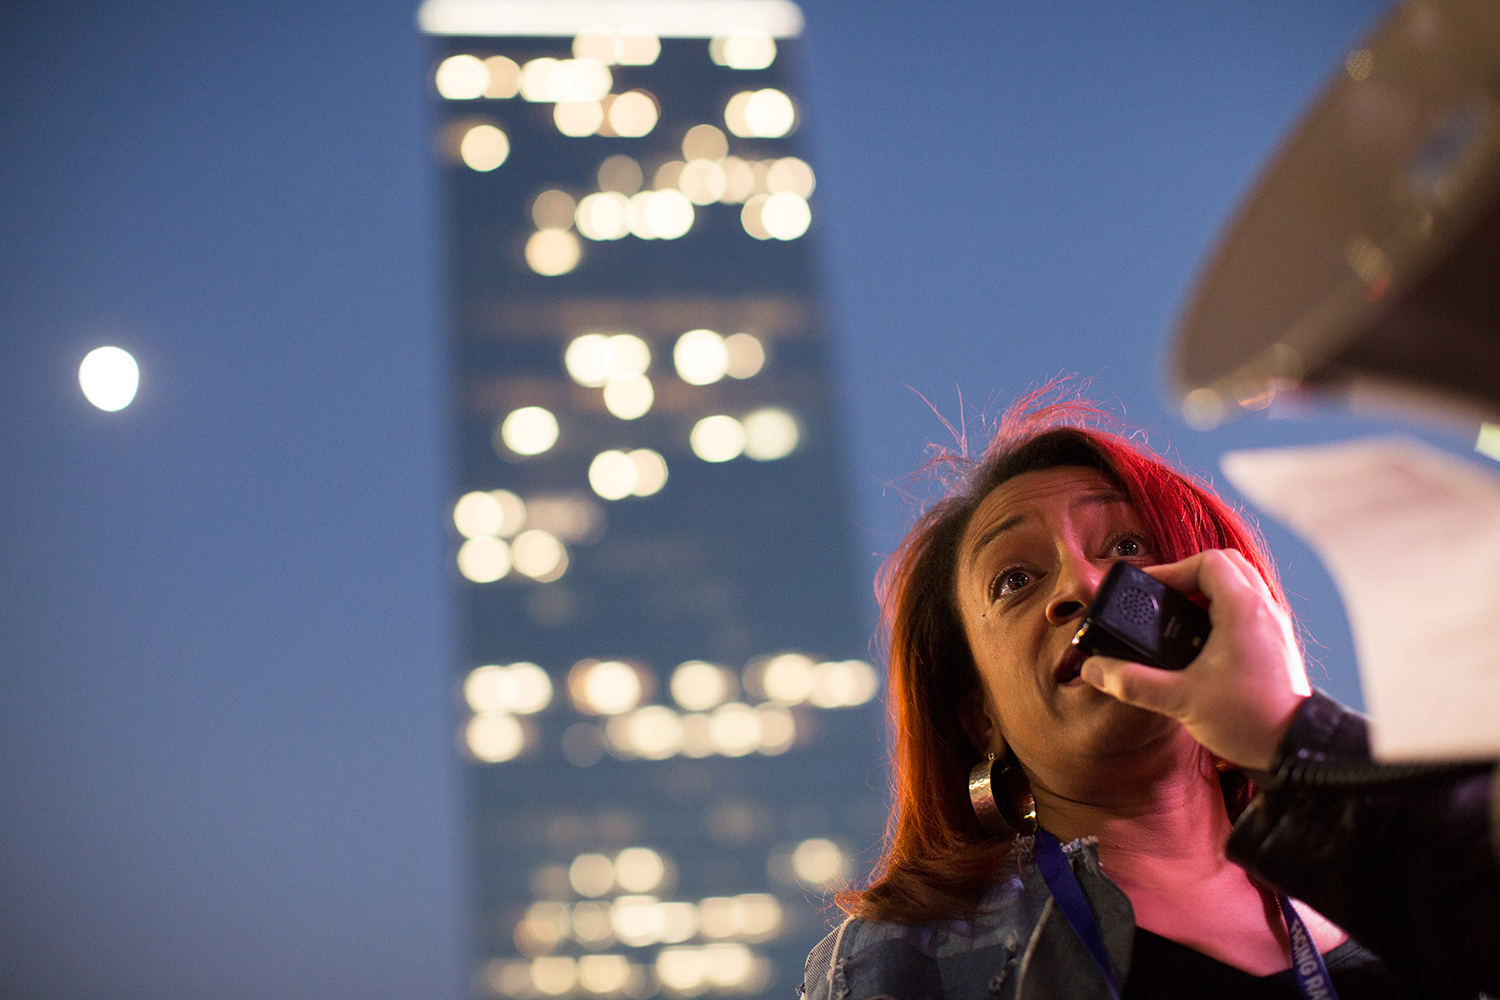  Woman speaks at anti-Trump/antihate racial justice rally across the street from CNN Center during the Facing Race 2016 conference, Atlanta, GA, 10 November 